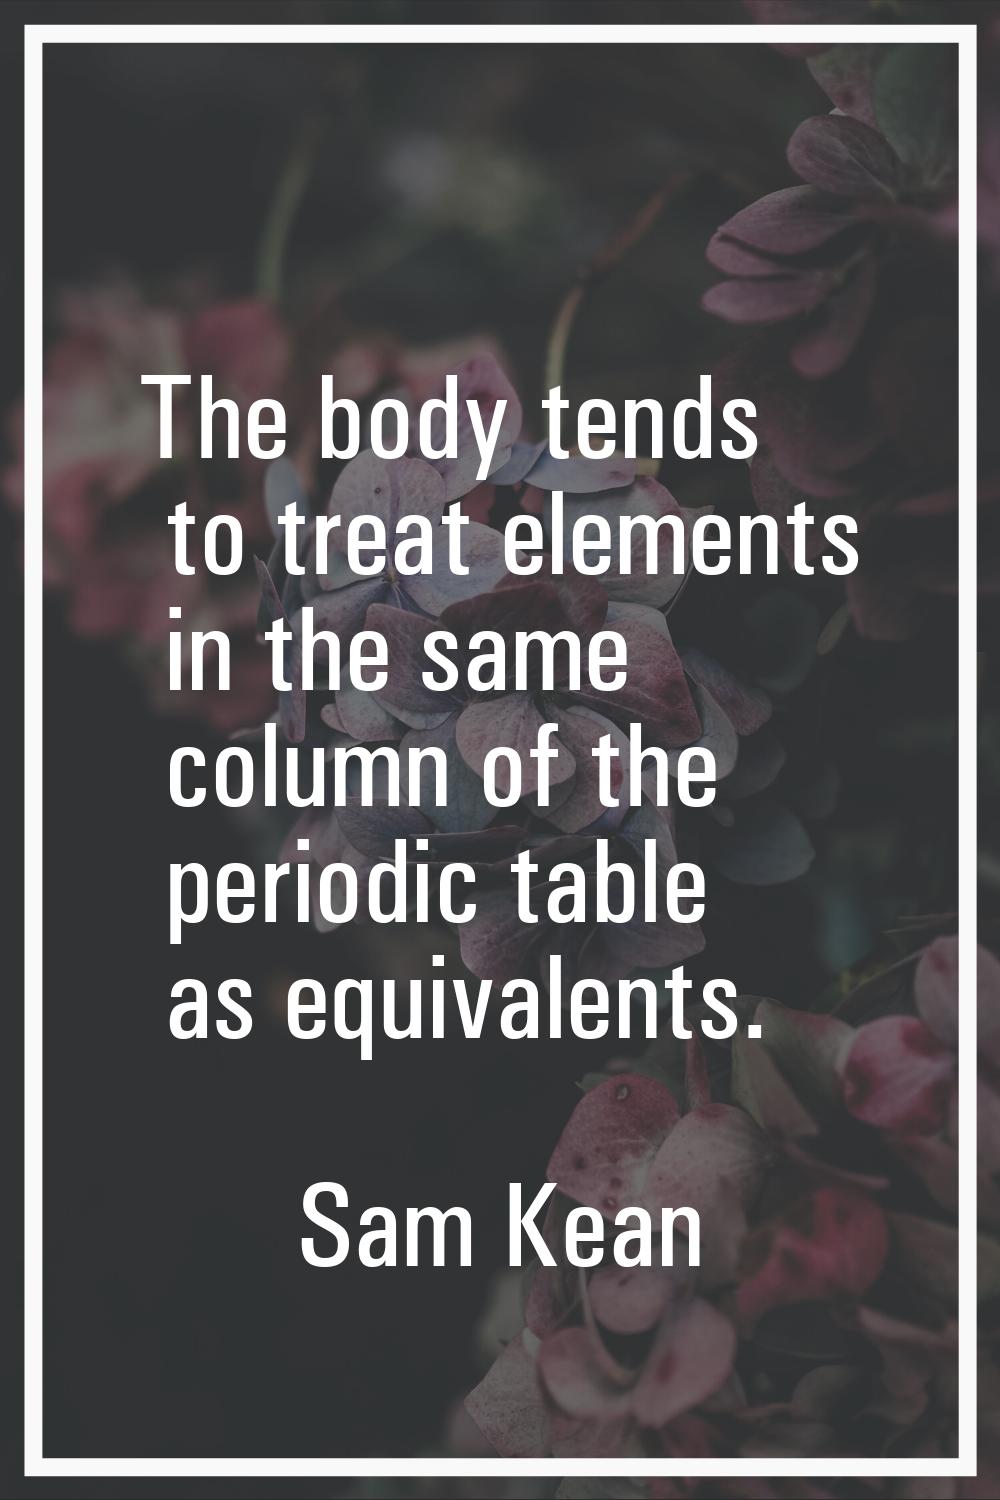 The body tends to treat elements in the same column of the periodic table as equivalents.